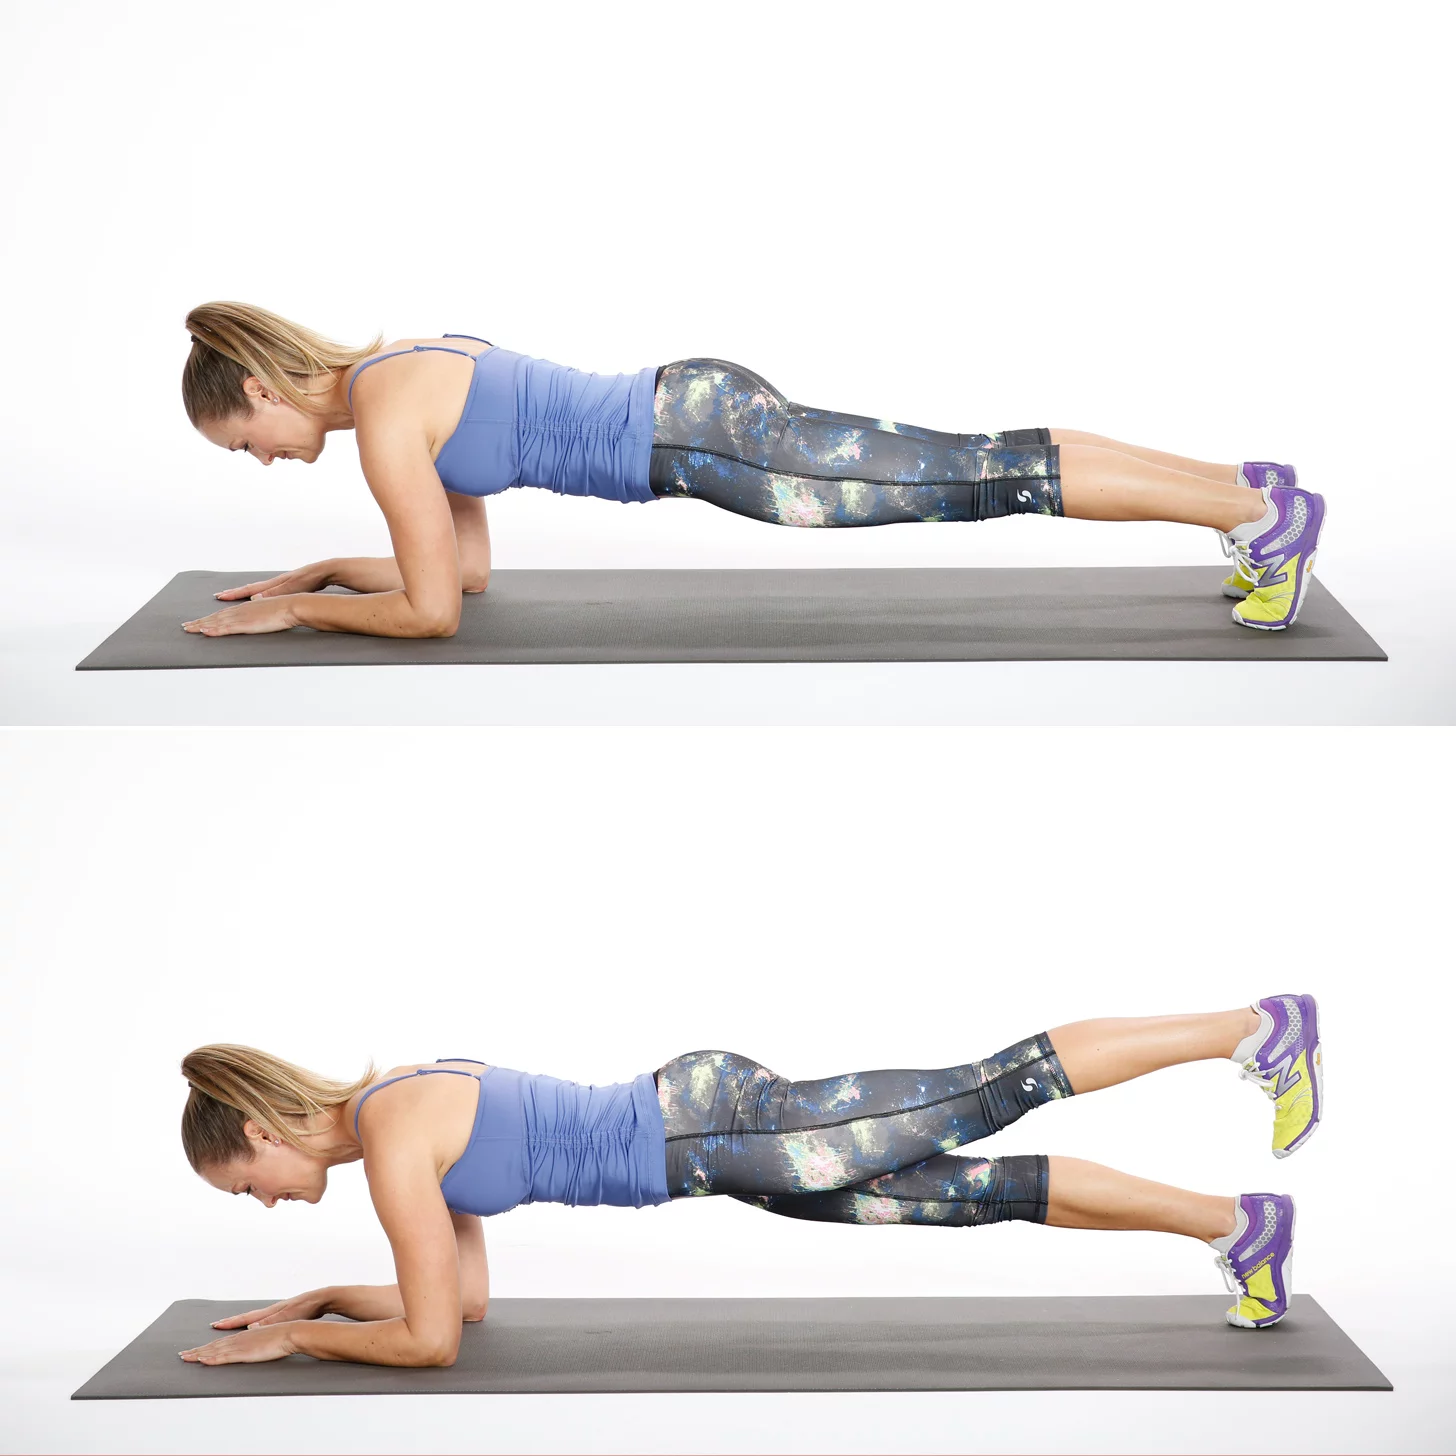 Strength Training - Core Stability with Planks